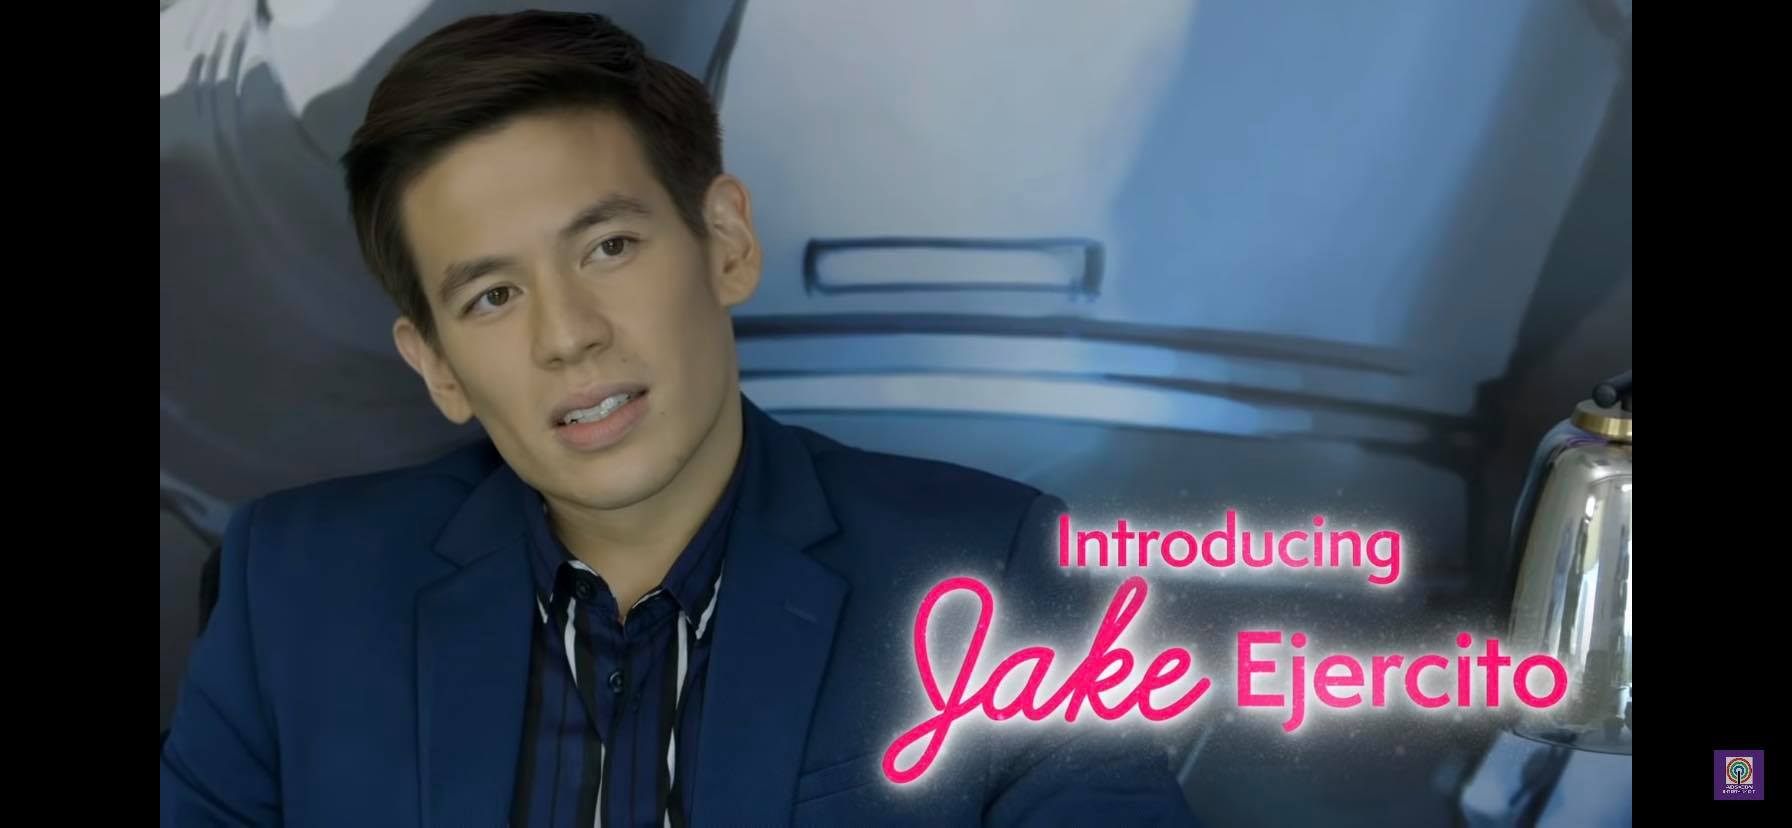 Jake Ejercito as Cedric (2)